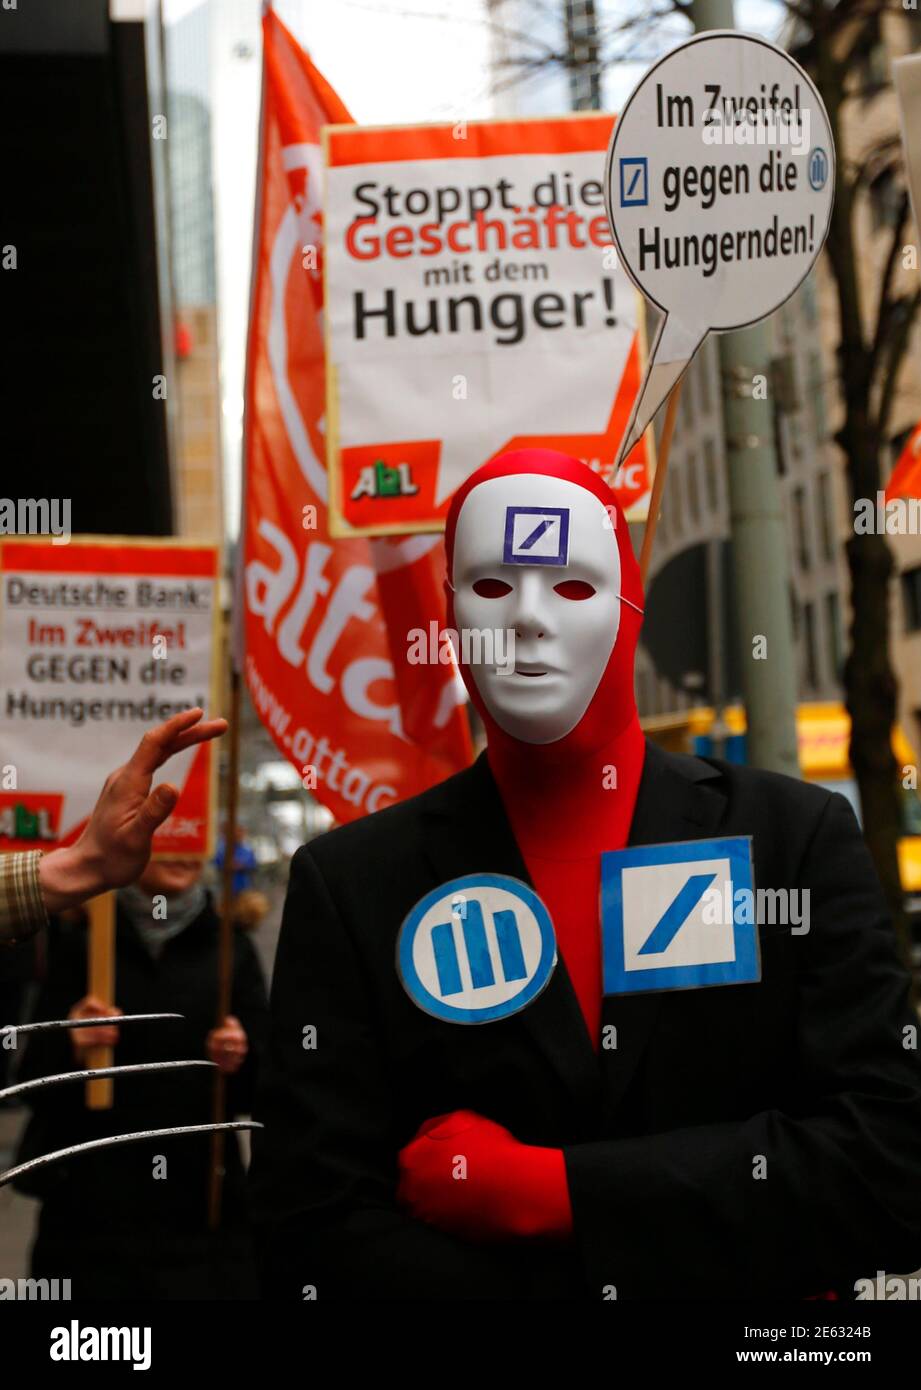 A demonstrator with a placard reading 'in doubt against the hungry' stands in front of the headquarters of Germany's largest business bank, Deutsche Bank, as he demonstrates against speculations with food prices before the bank's annual news conference in Frankfurt, January 31, 2013. Deutsche Bank posted a $3.5 billion quarterly loss as it took legal and restructuring charges aimed at drawing a line under past scandals and boosting its capital position in a tougher regulatory and trading environment.  REUTERS/Kai Pfaffenbach (GERMANY - Tags: BUSINESS CIVIL UNREST) Stock Photo